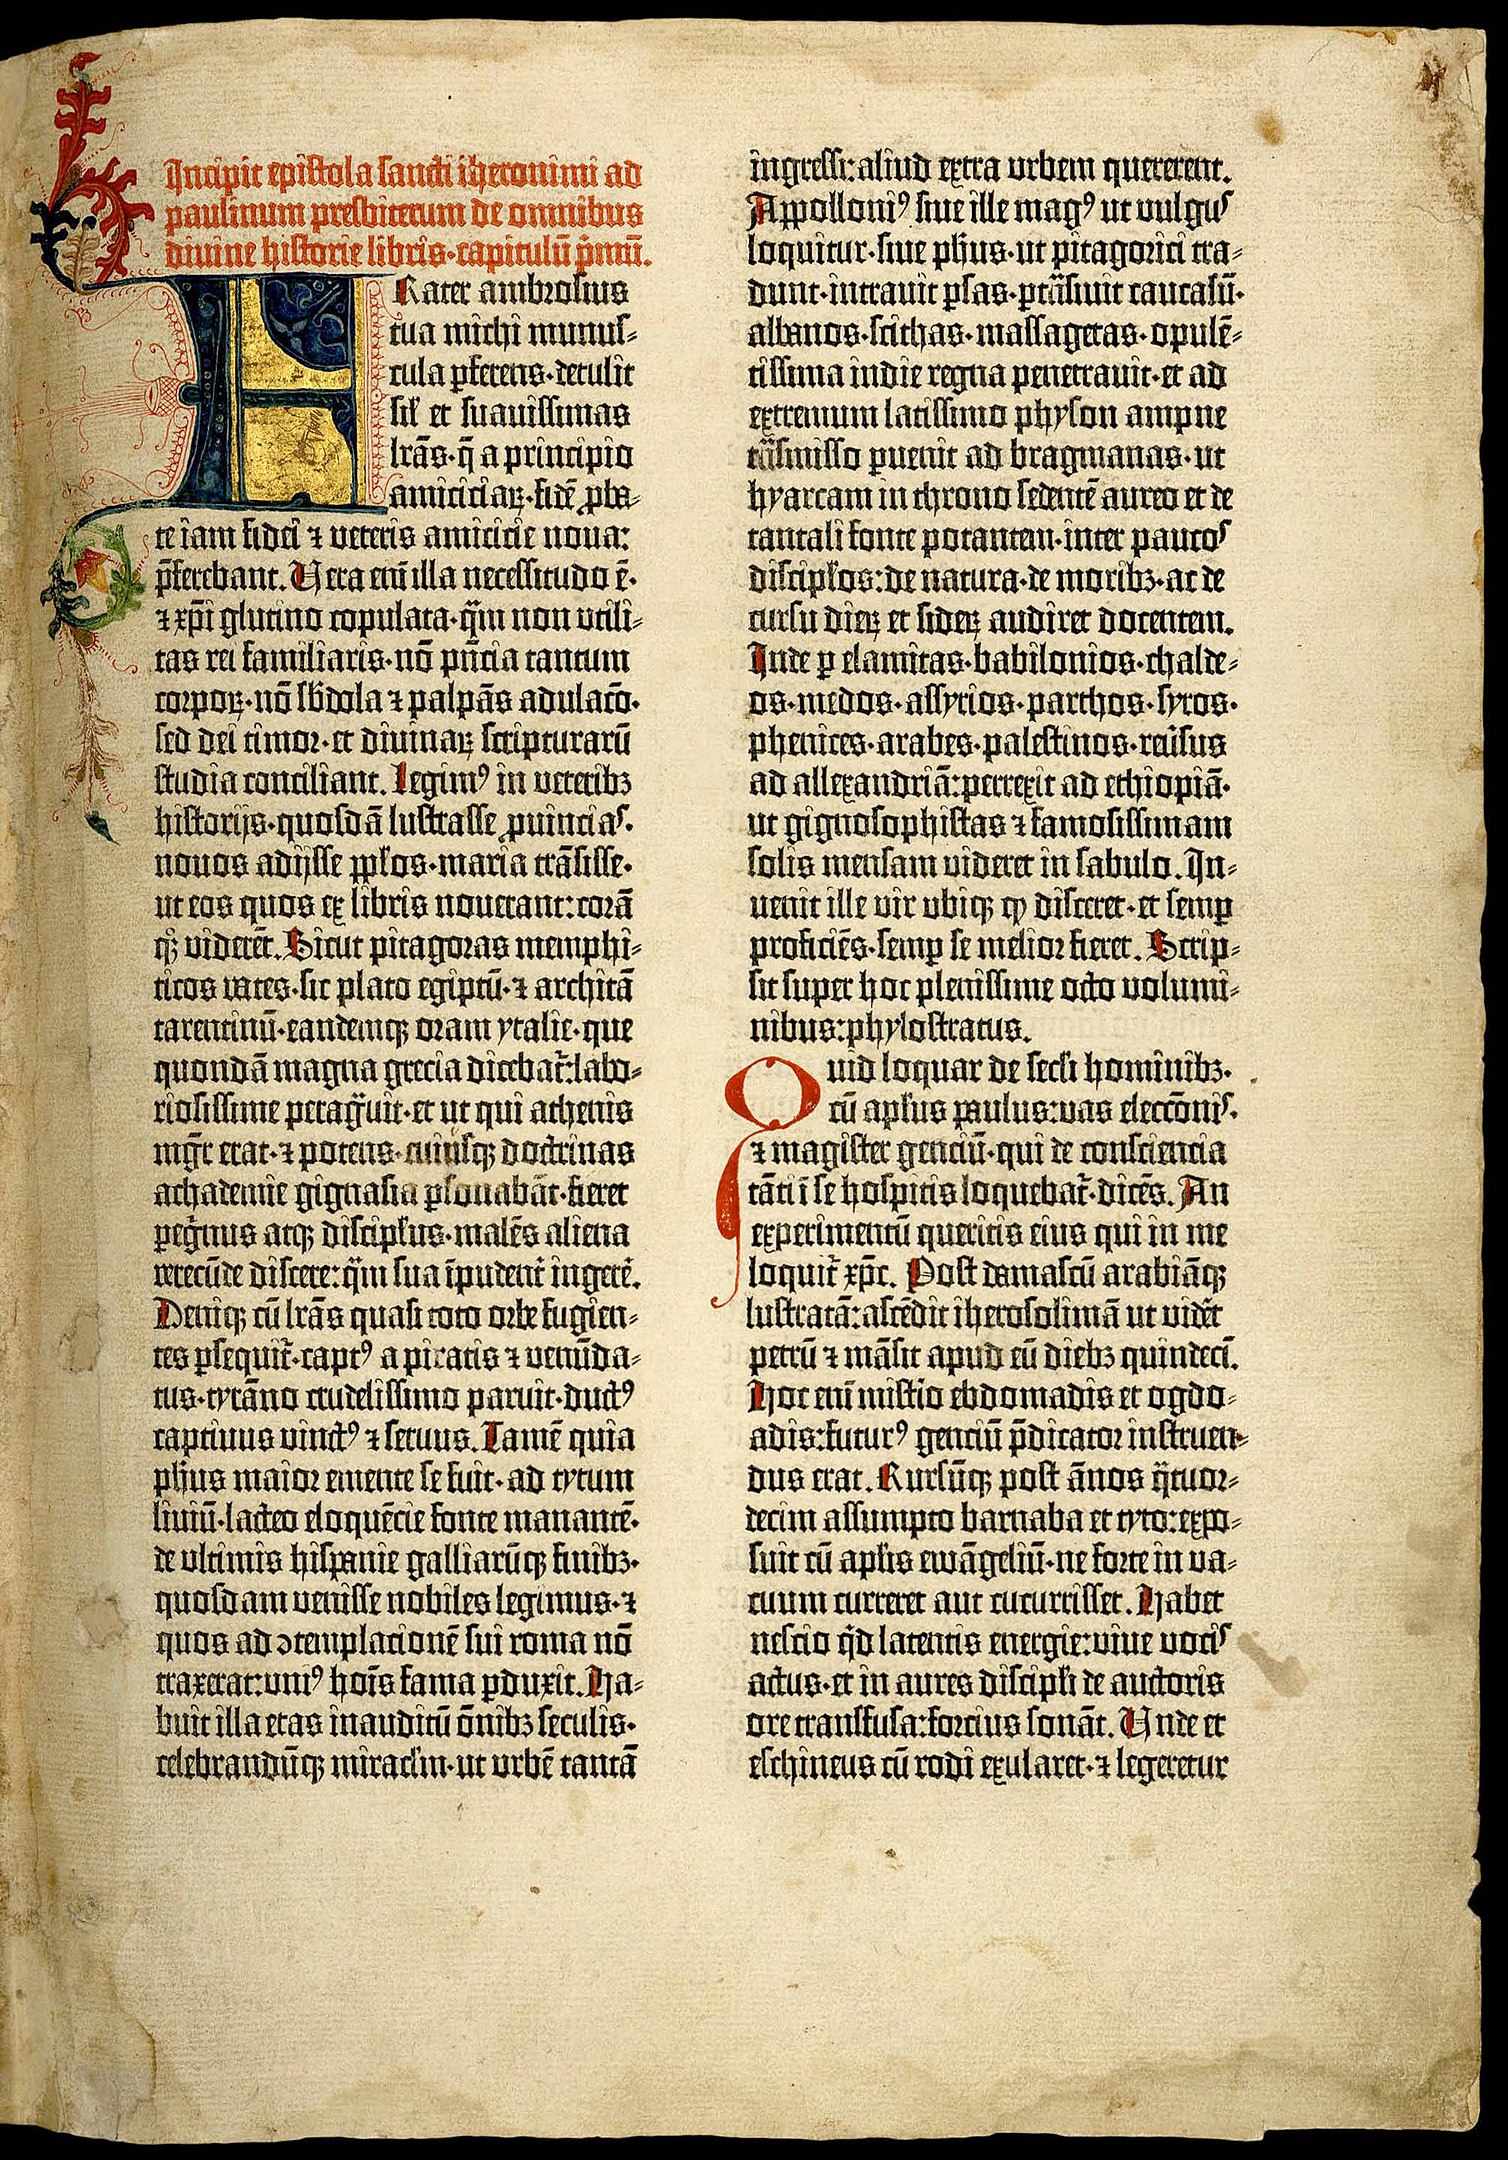 The first page of Gutenberg's bible